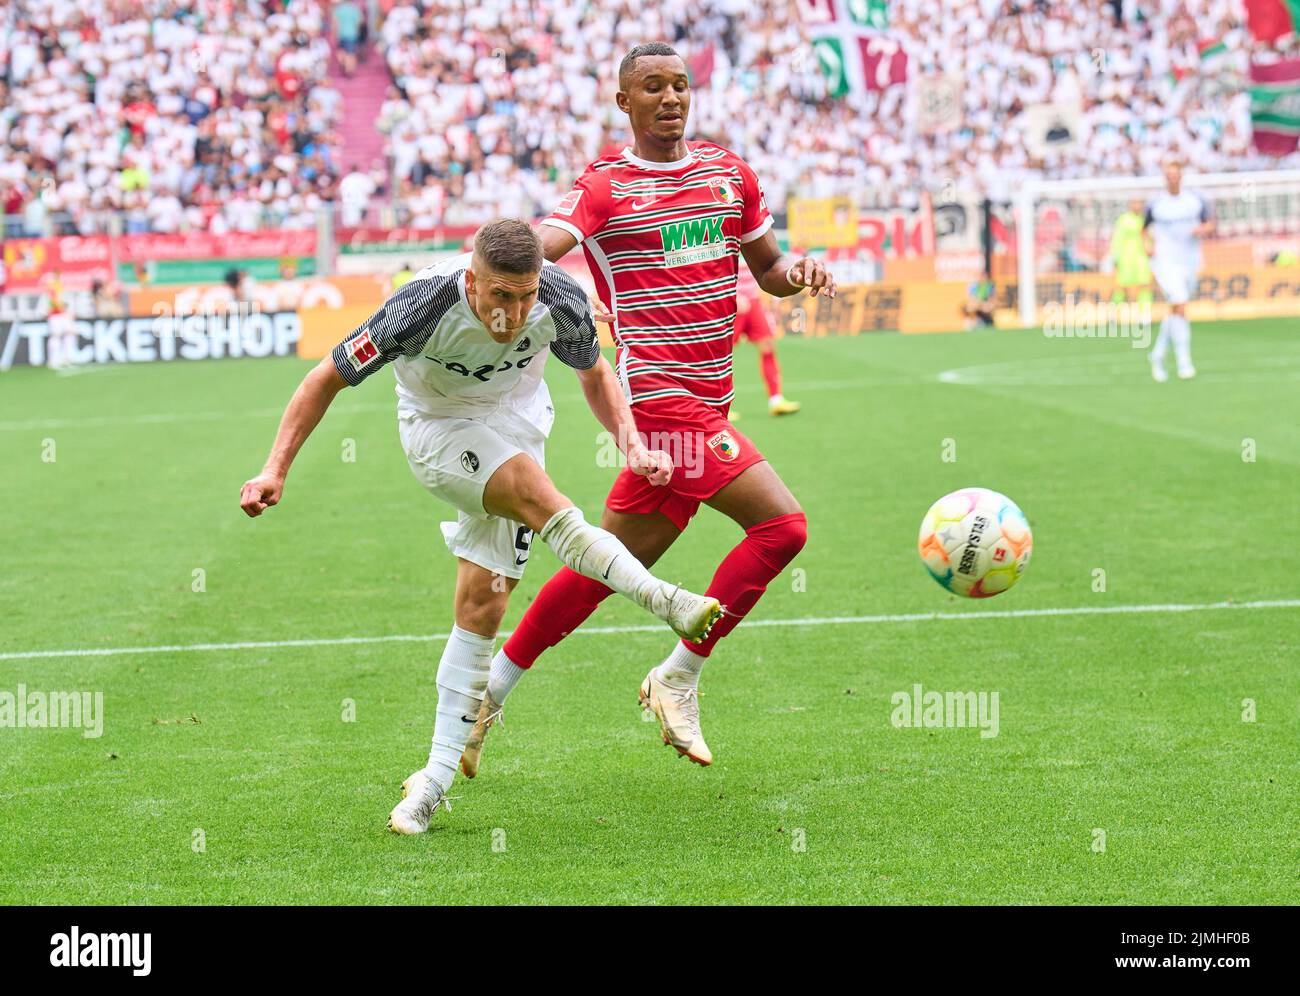 Roland SALLAI, FRG 22  compete for the ball, tackling, duel, header, zweikampf, action, fight against Felix UDUOKHAI, FCA 19  in the match FC AUGSBURG - SC FREIBURG 0-4 1.German Football League on Aug 06, 2022 in Augsburg, Germany. Season 2022/2023, matchday 1, 1.Bundesliga, FCB, Munich, 1.Spieltag © Peter Schatz / Alamy Live News    - DFL REGULATIONS PROHIBIT ANY USE OF PHOTOGRAPHS as IMAGE SEQUENCES and/or QUASI-VIDEO - Stock Photo